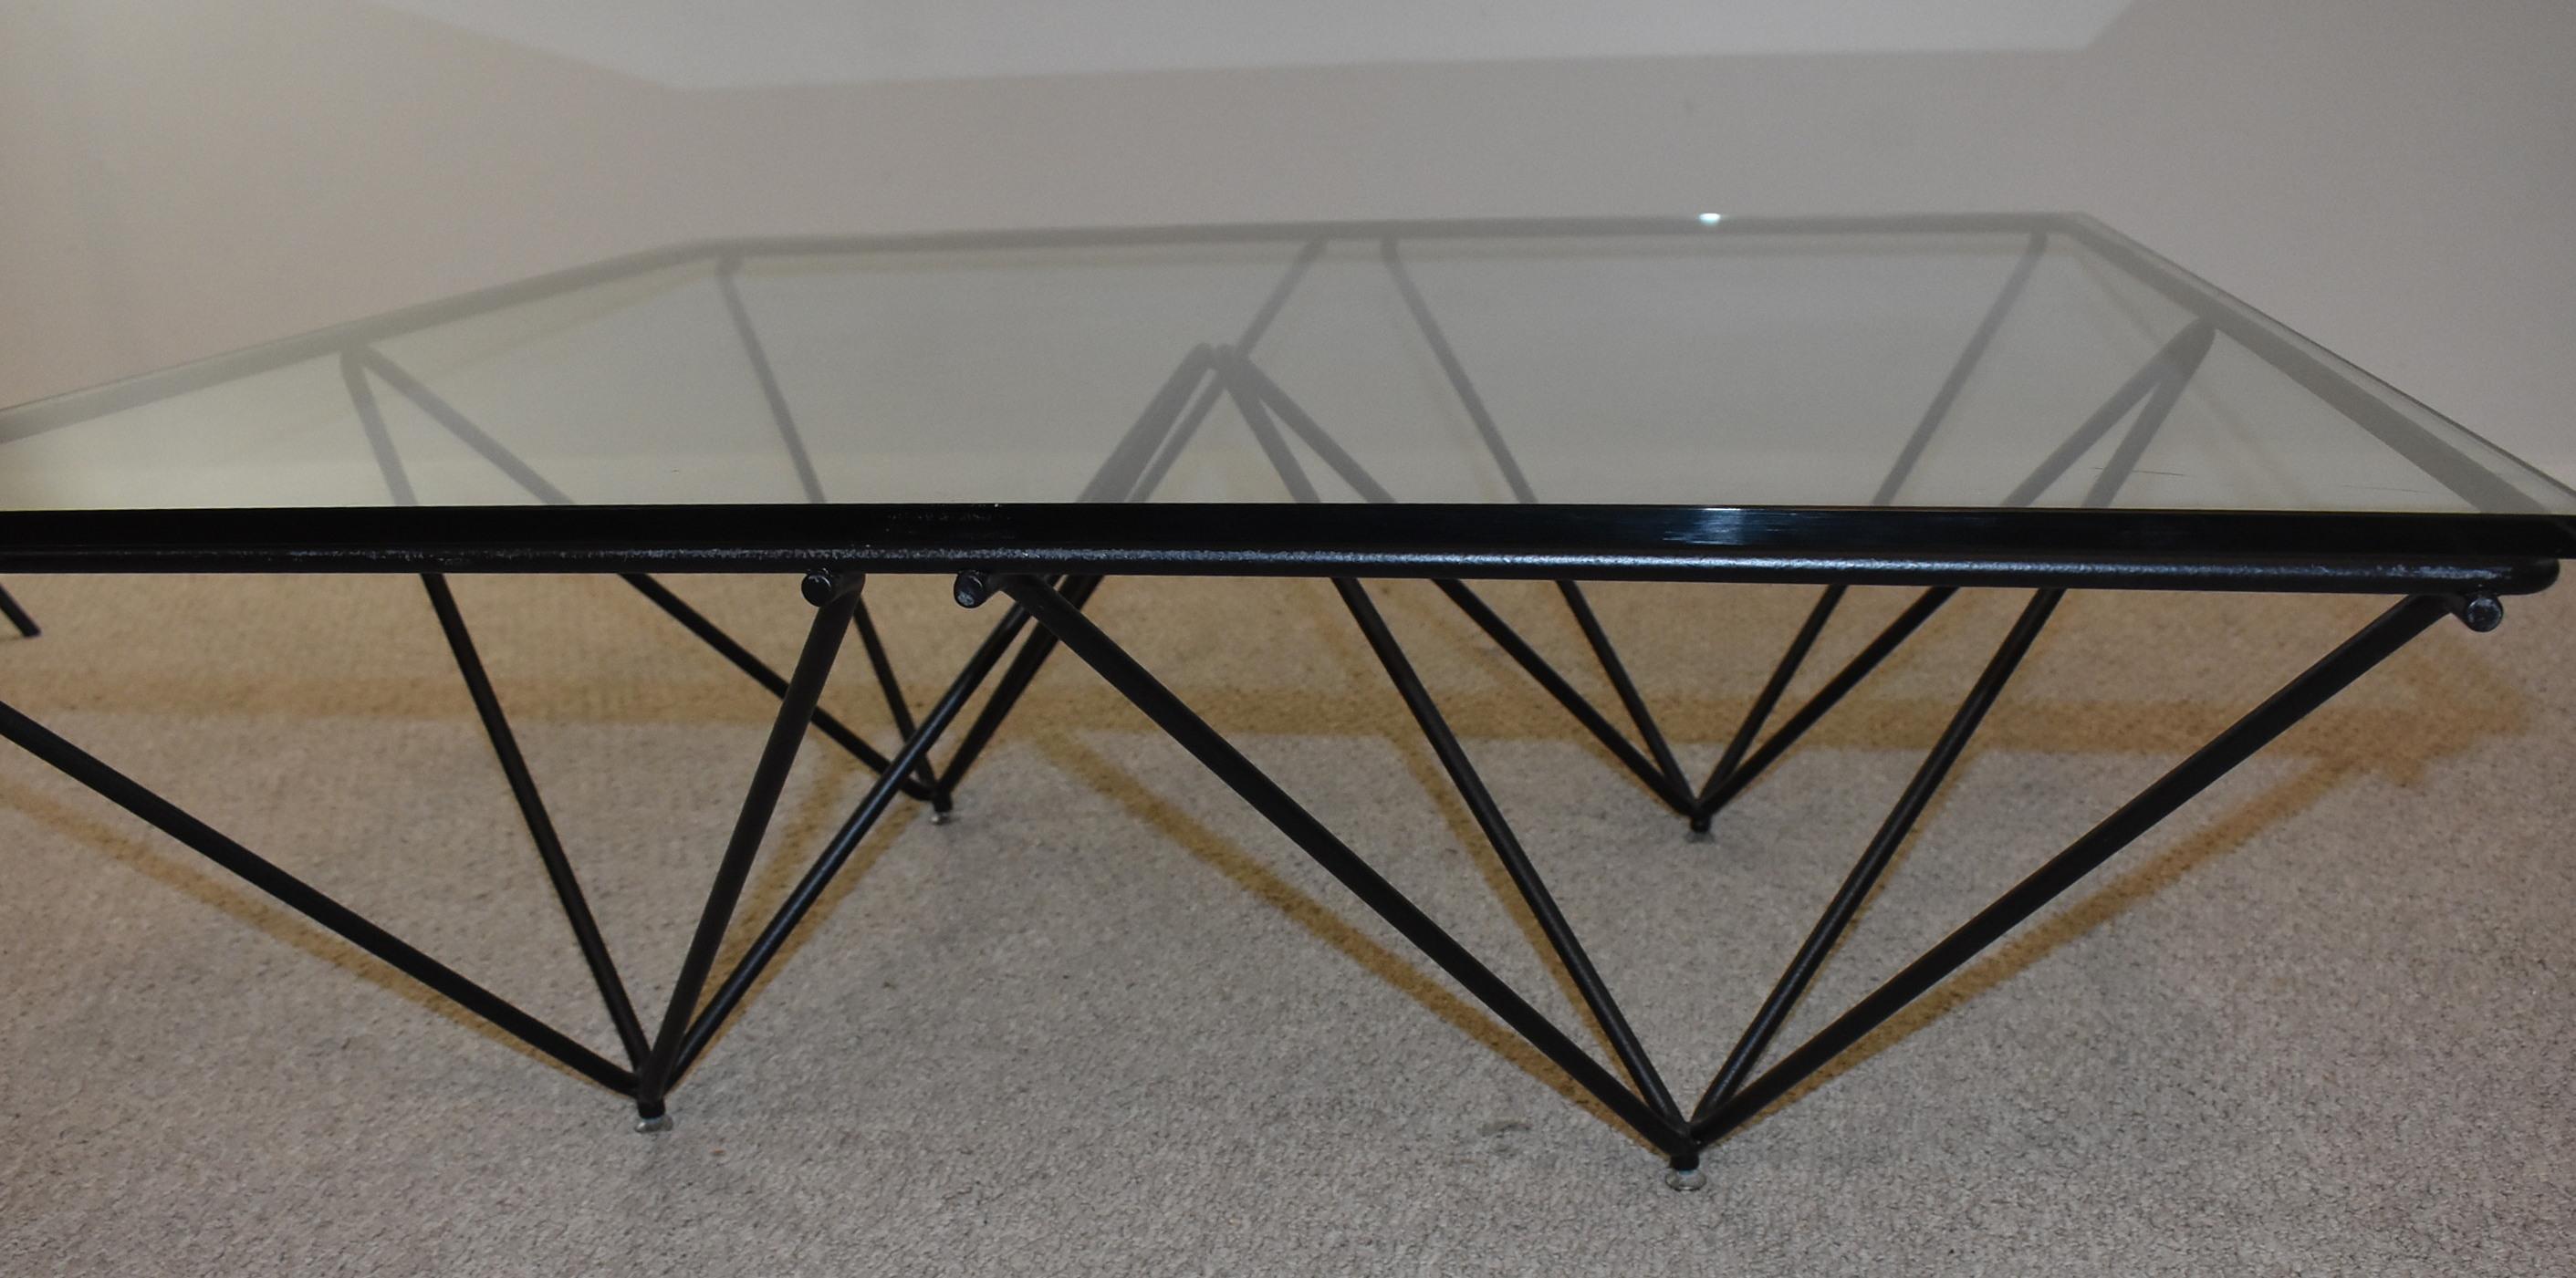 Unknown Paolo Piva Alanda Clear Glass Top & Geometric Iron Coffee Table For Sale